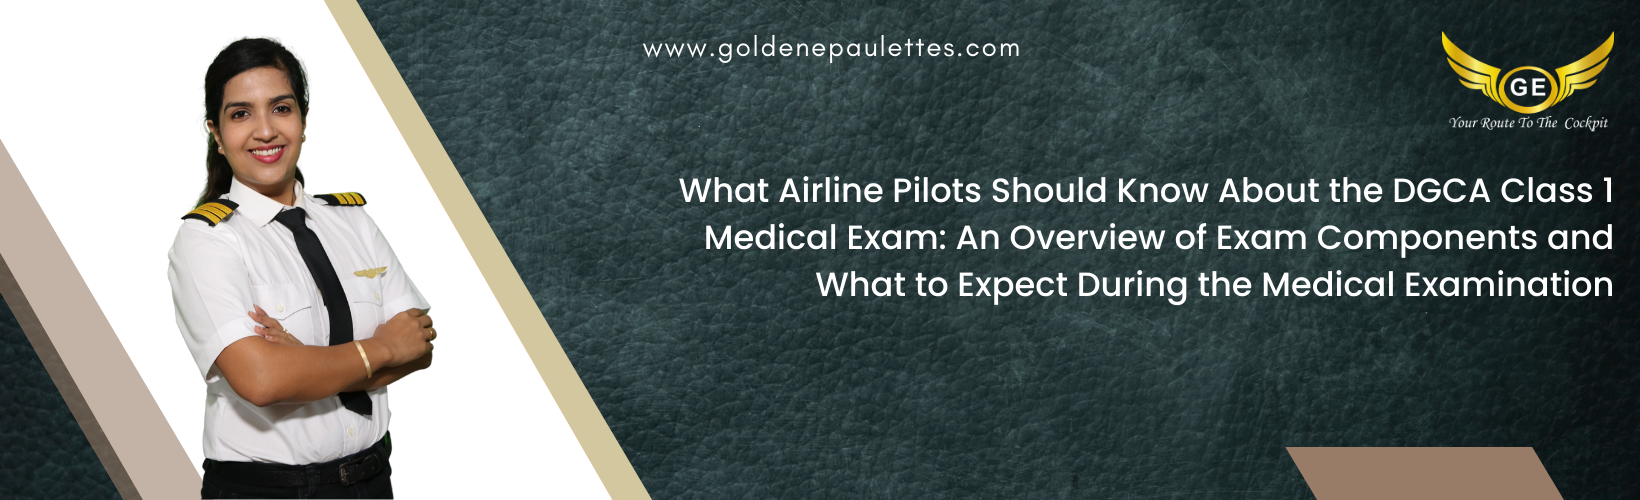 What the DGCA Class 1 Medical Exam Entails for Airline Pilots